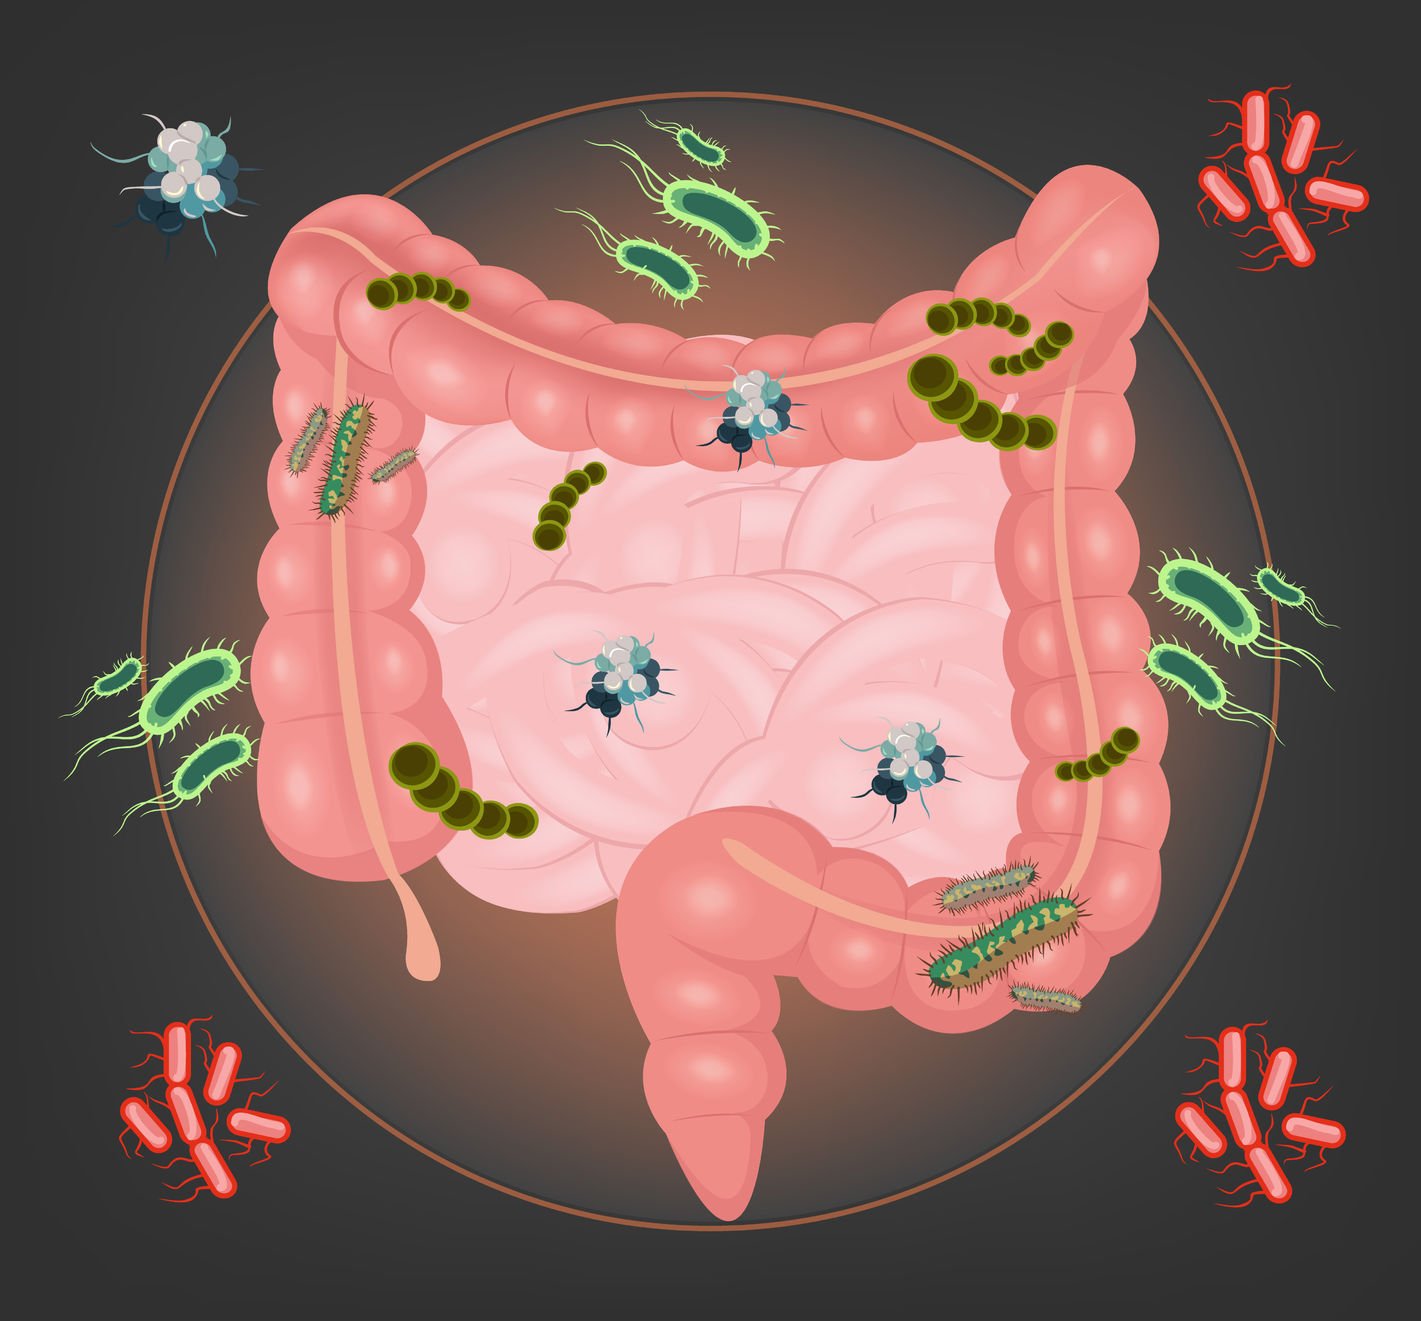 overgrowth of bacteria in gut